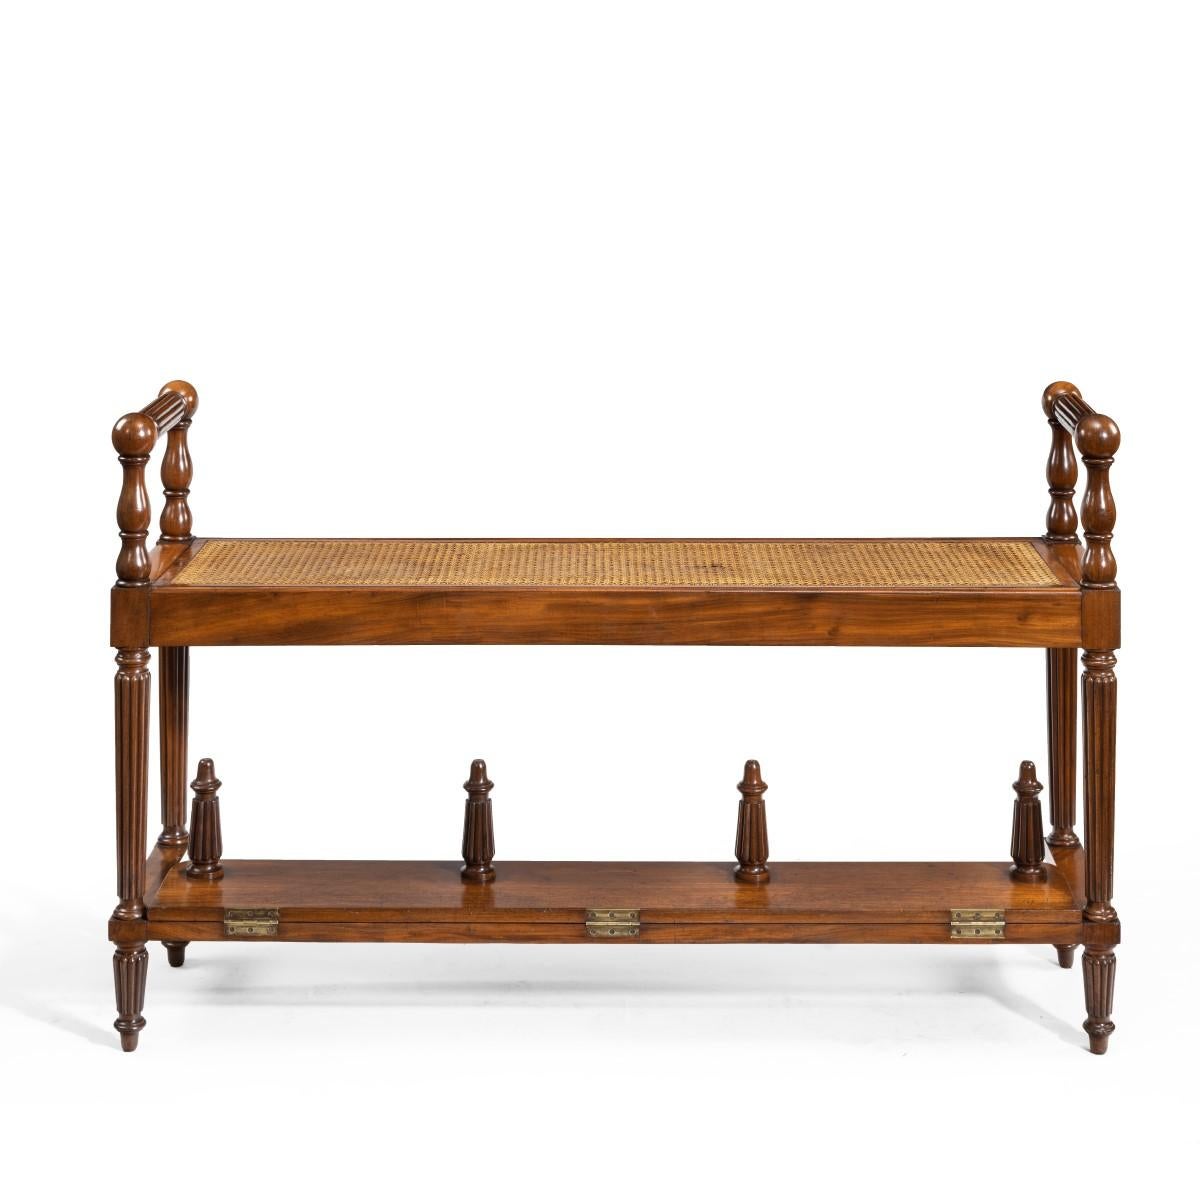 An unusual Louis Philippe mahogany hall bench with a folding footrest, of narrow rectangular form with turned handles at either end set upon tapering reeded supports and feet, the hinged footrest with similar turned feet, French, circa